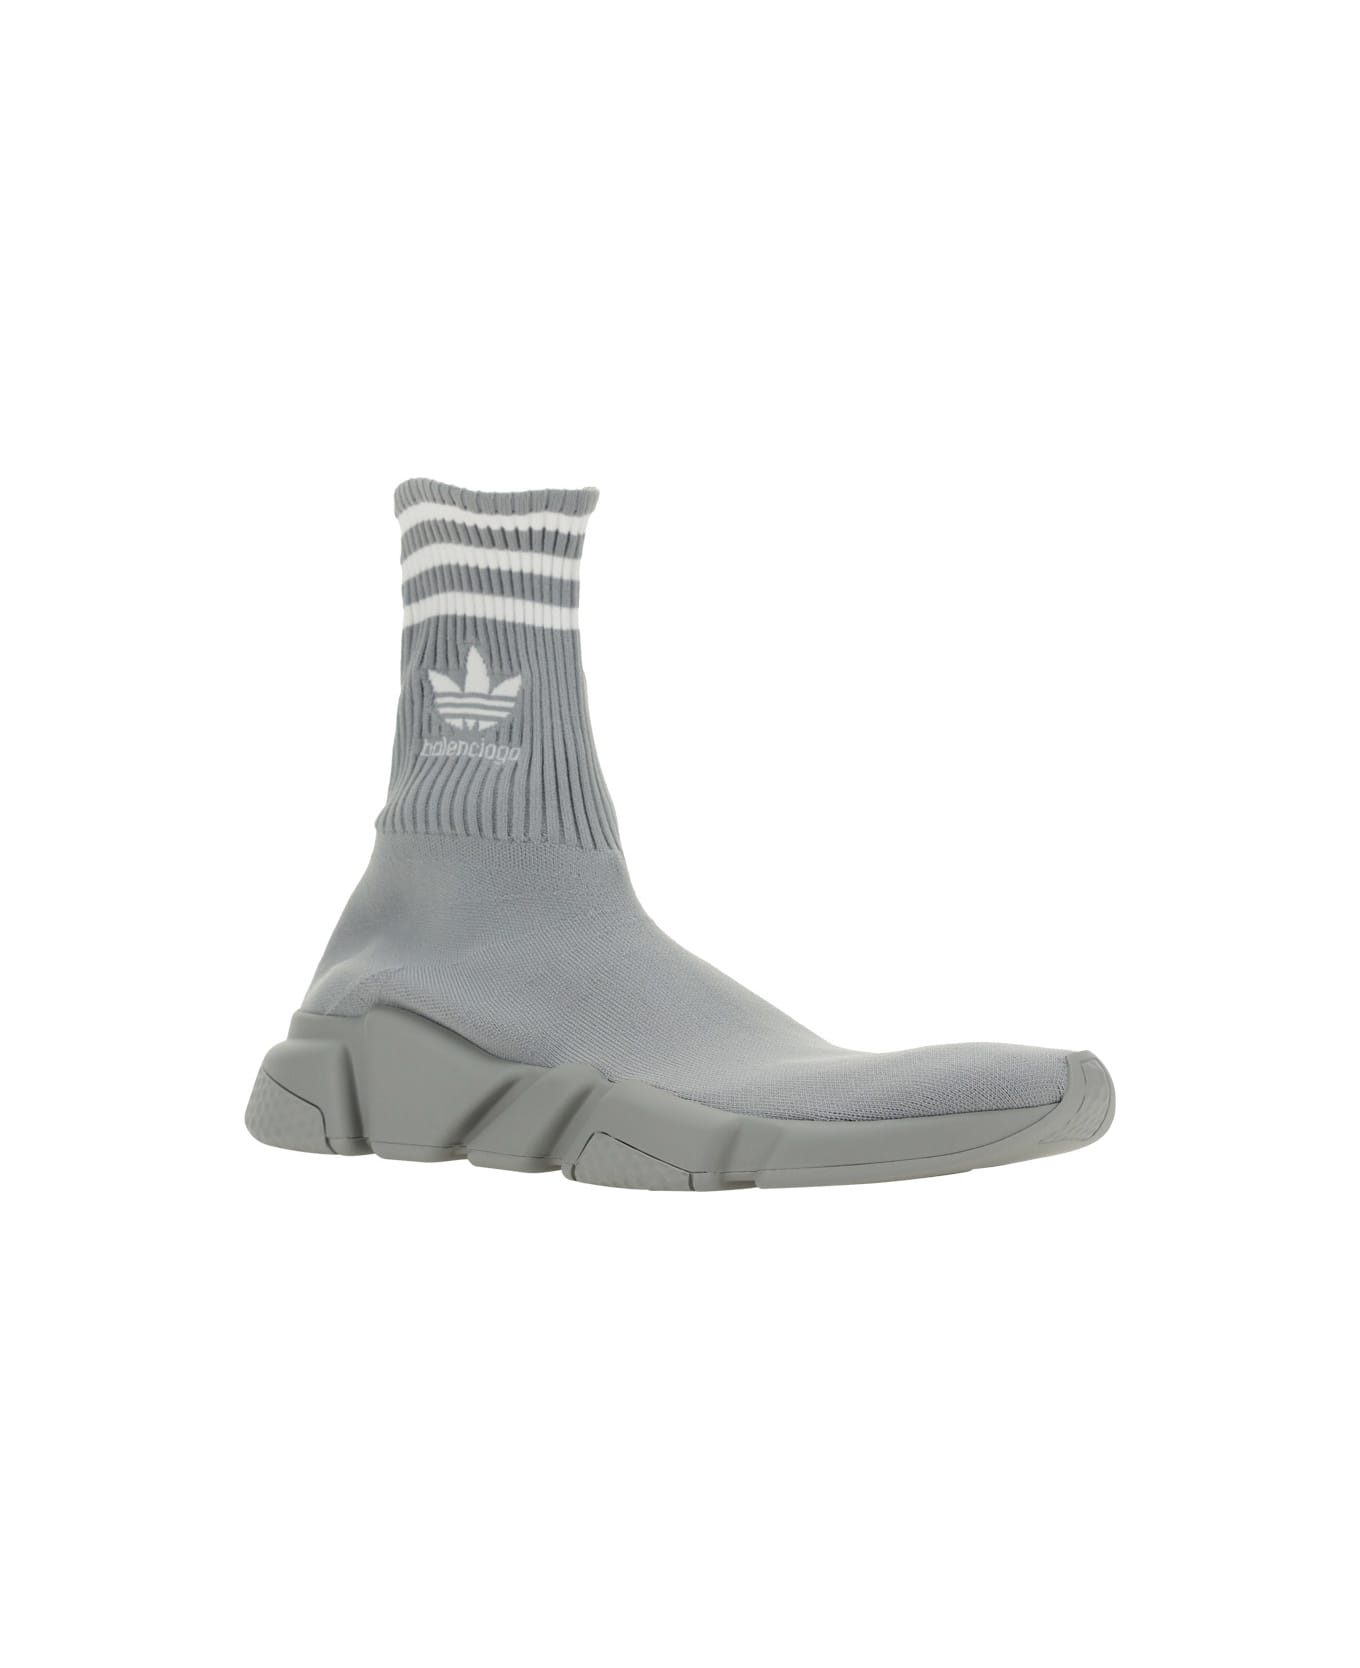 Balenciaga Speed Trainers Knitted Sock-sneakers - Grey